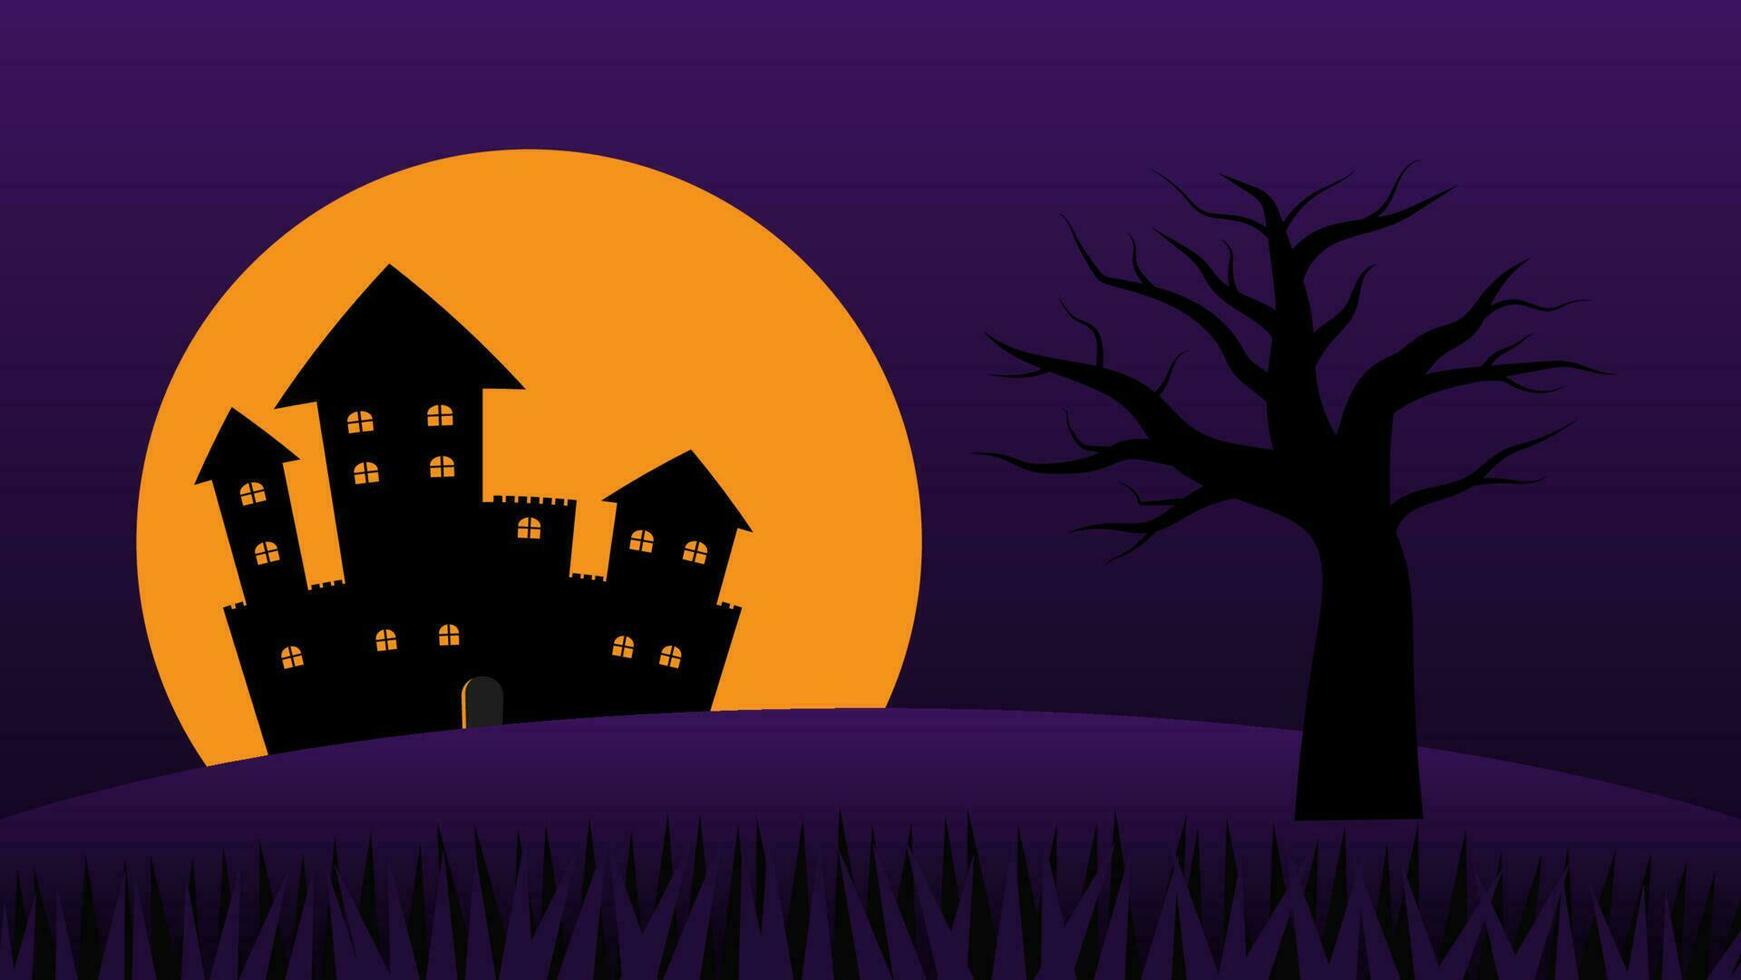 happy Halloween holiday party background. haunted castle cartoon on hills with full moon in night sky vector